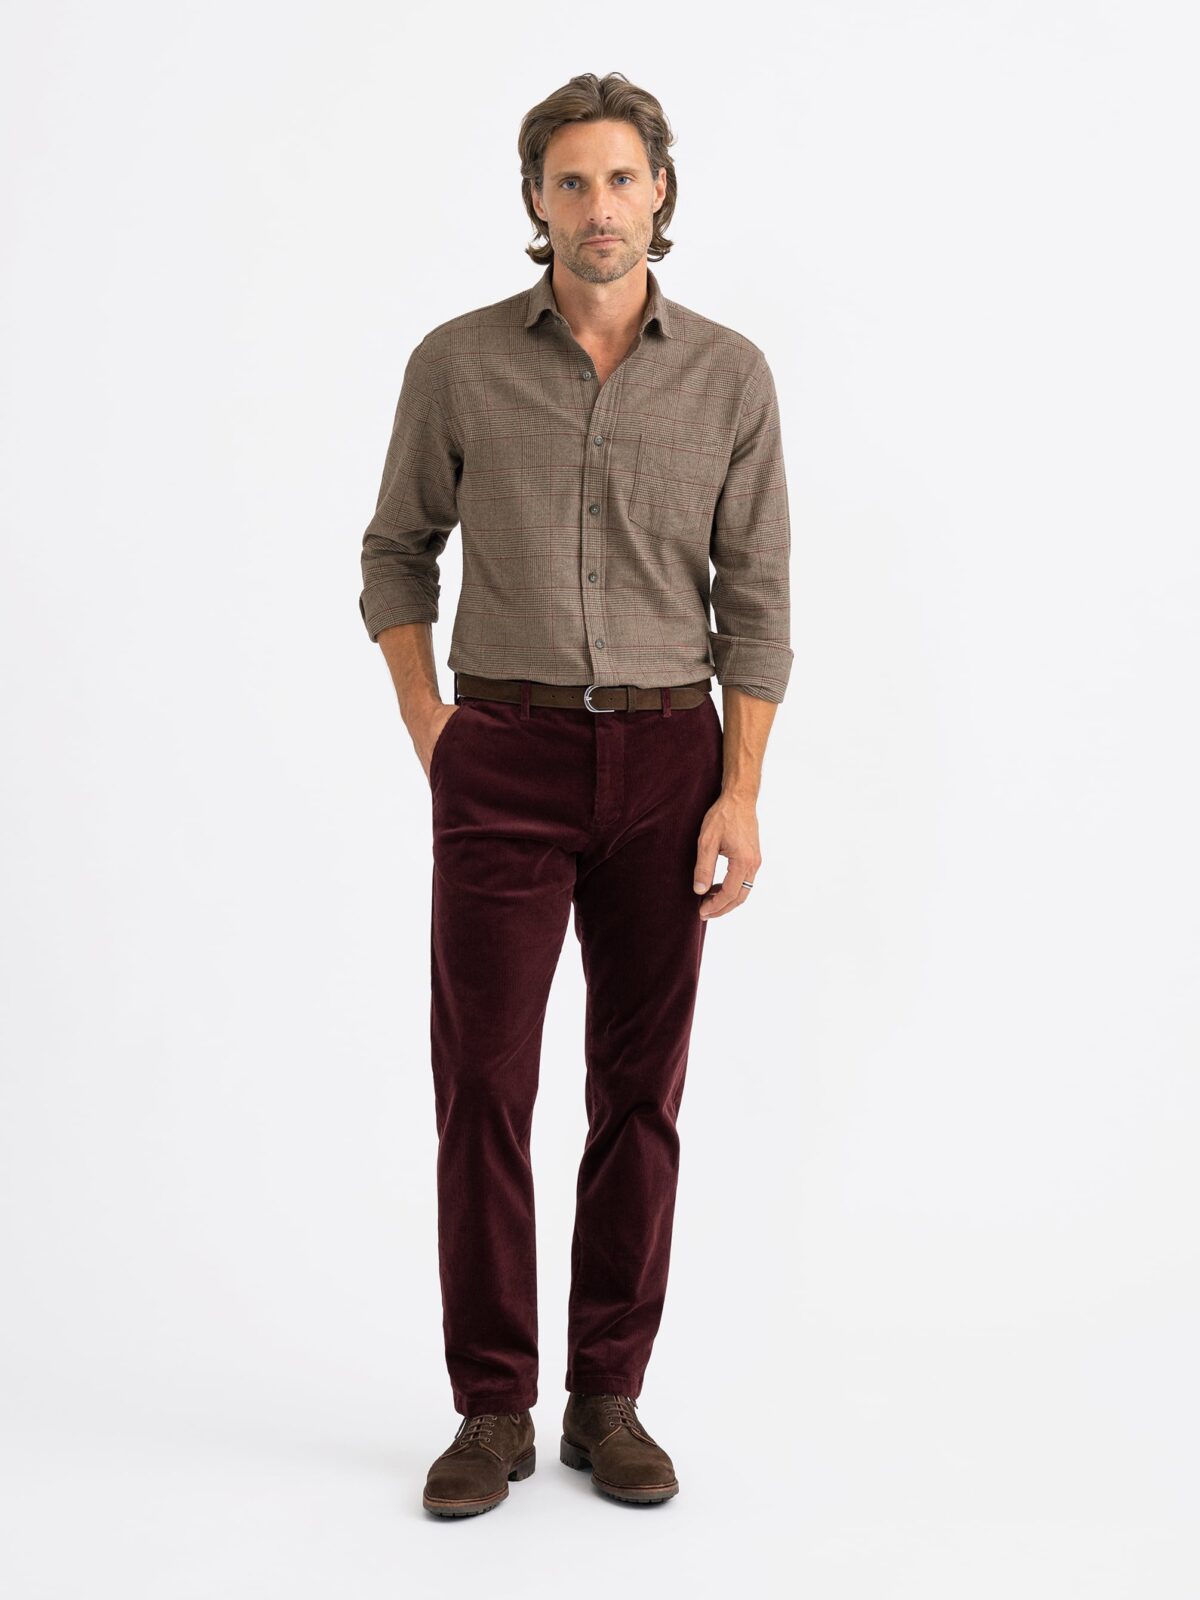 US Polo Cotton Maroon Track Pants Lower Bottom for Men